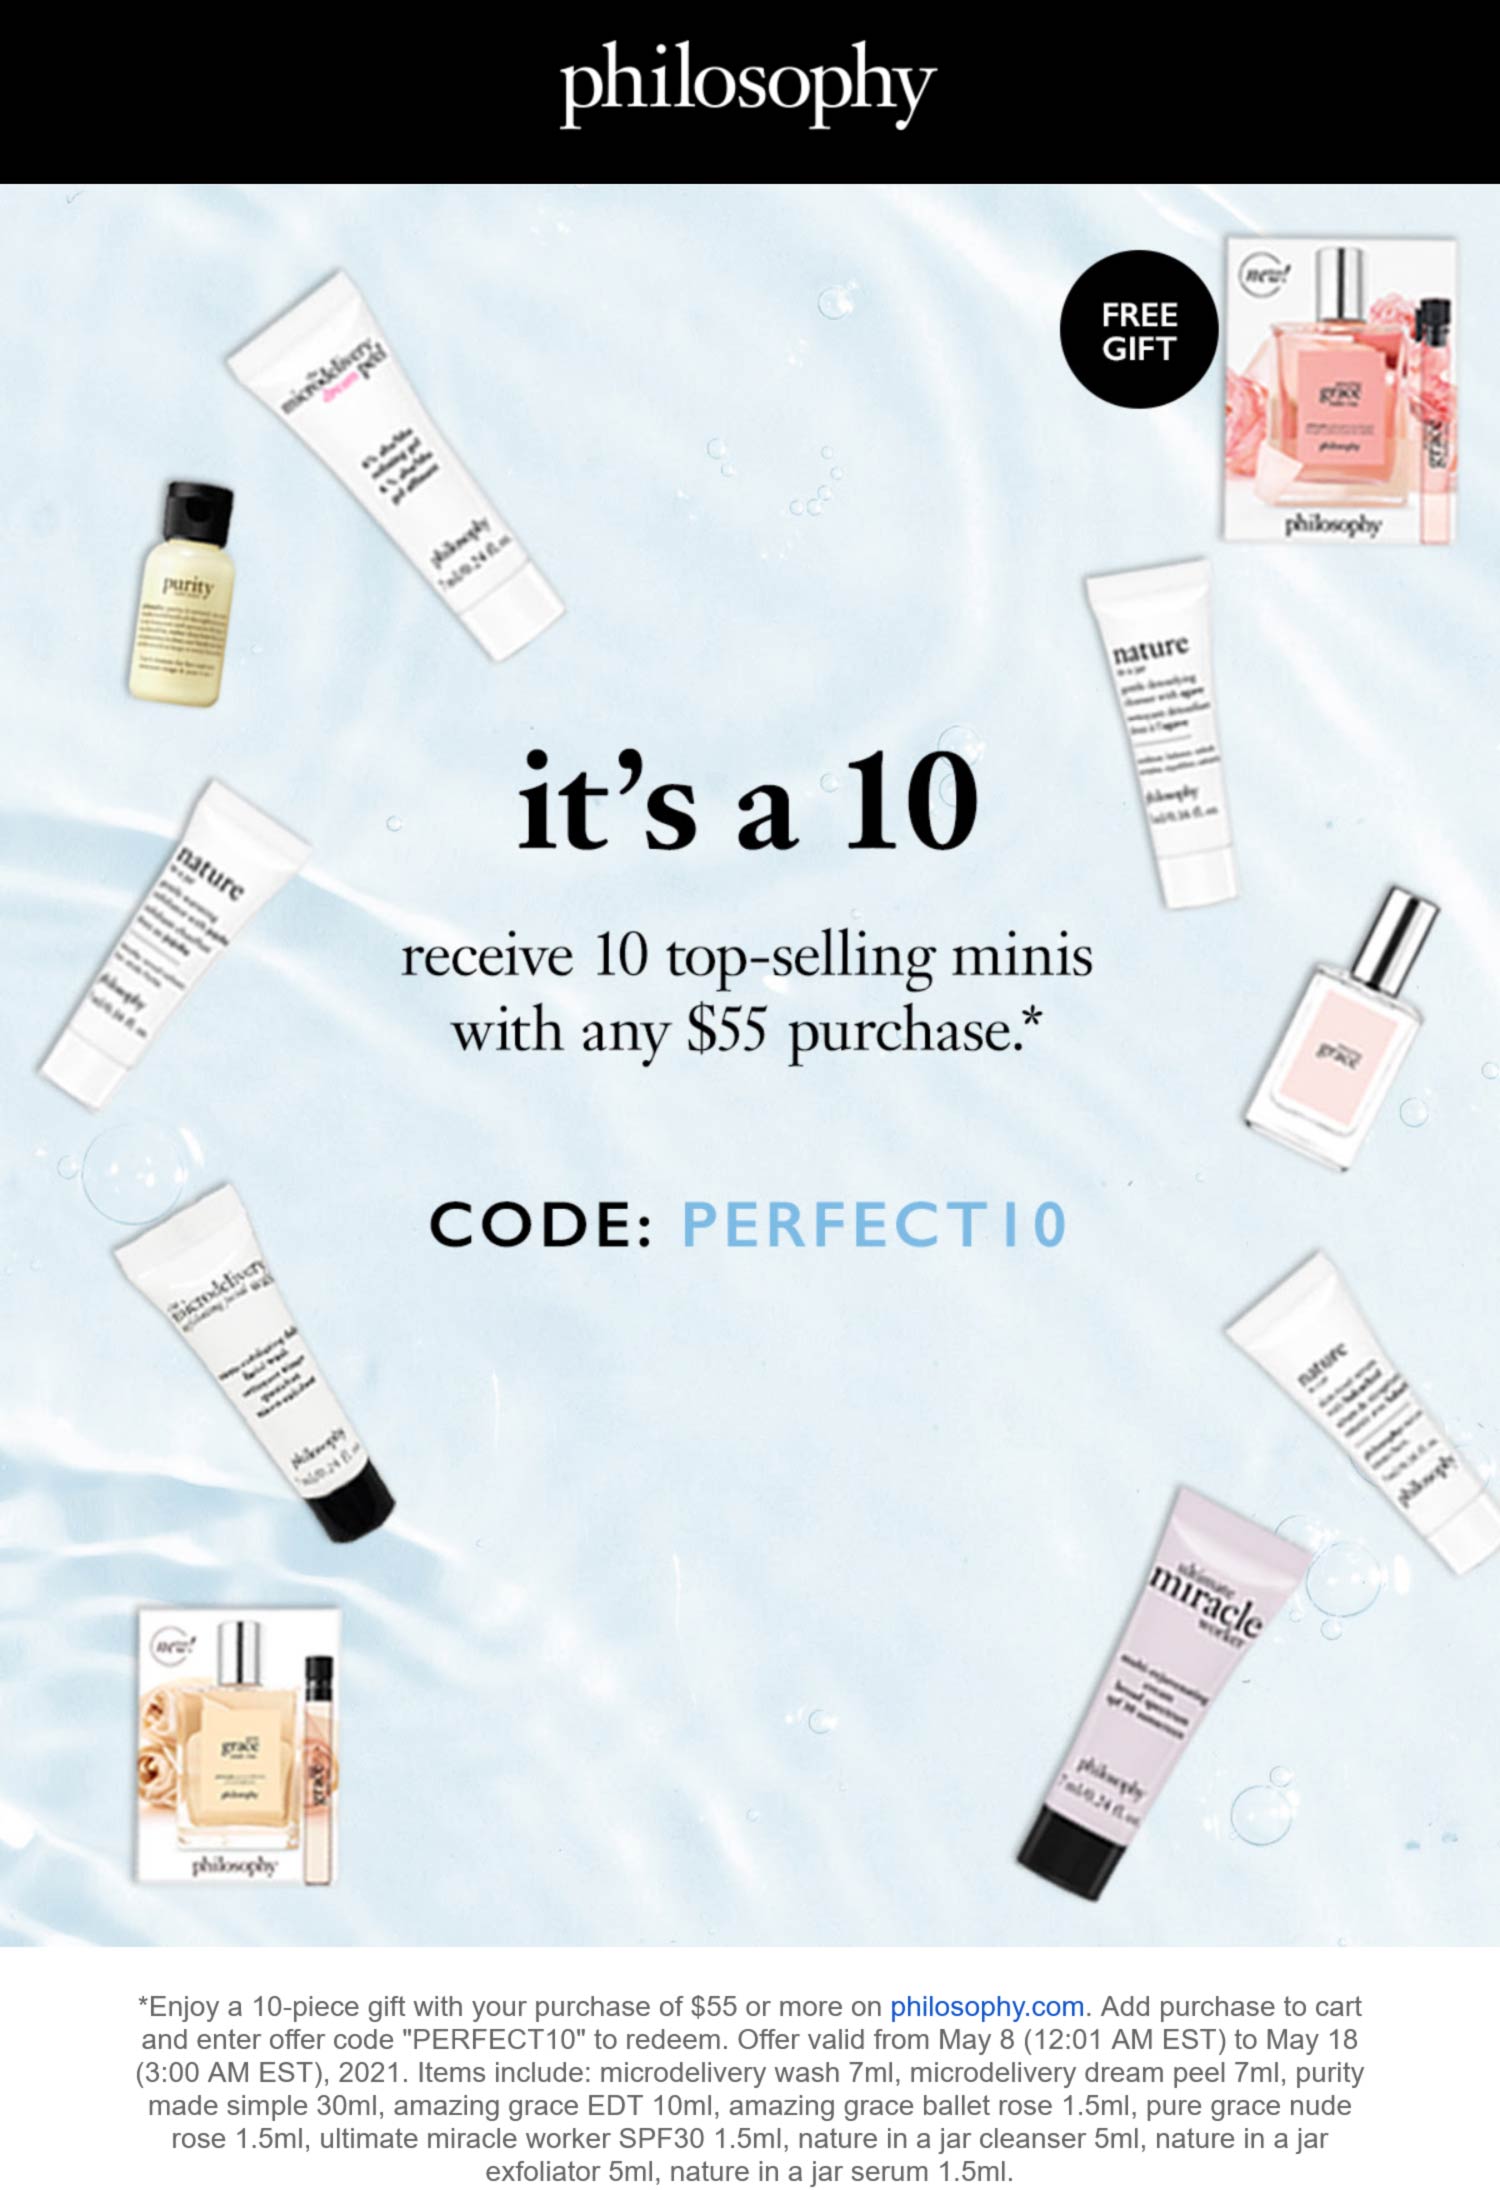 Philosophy stores Coupon  10 minis free with $55 spent at Philosophy via promo code PERFECT10 #philosophy 